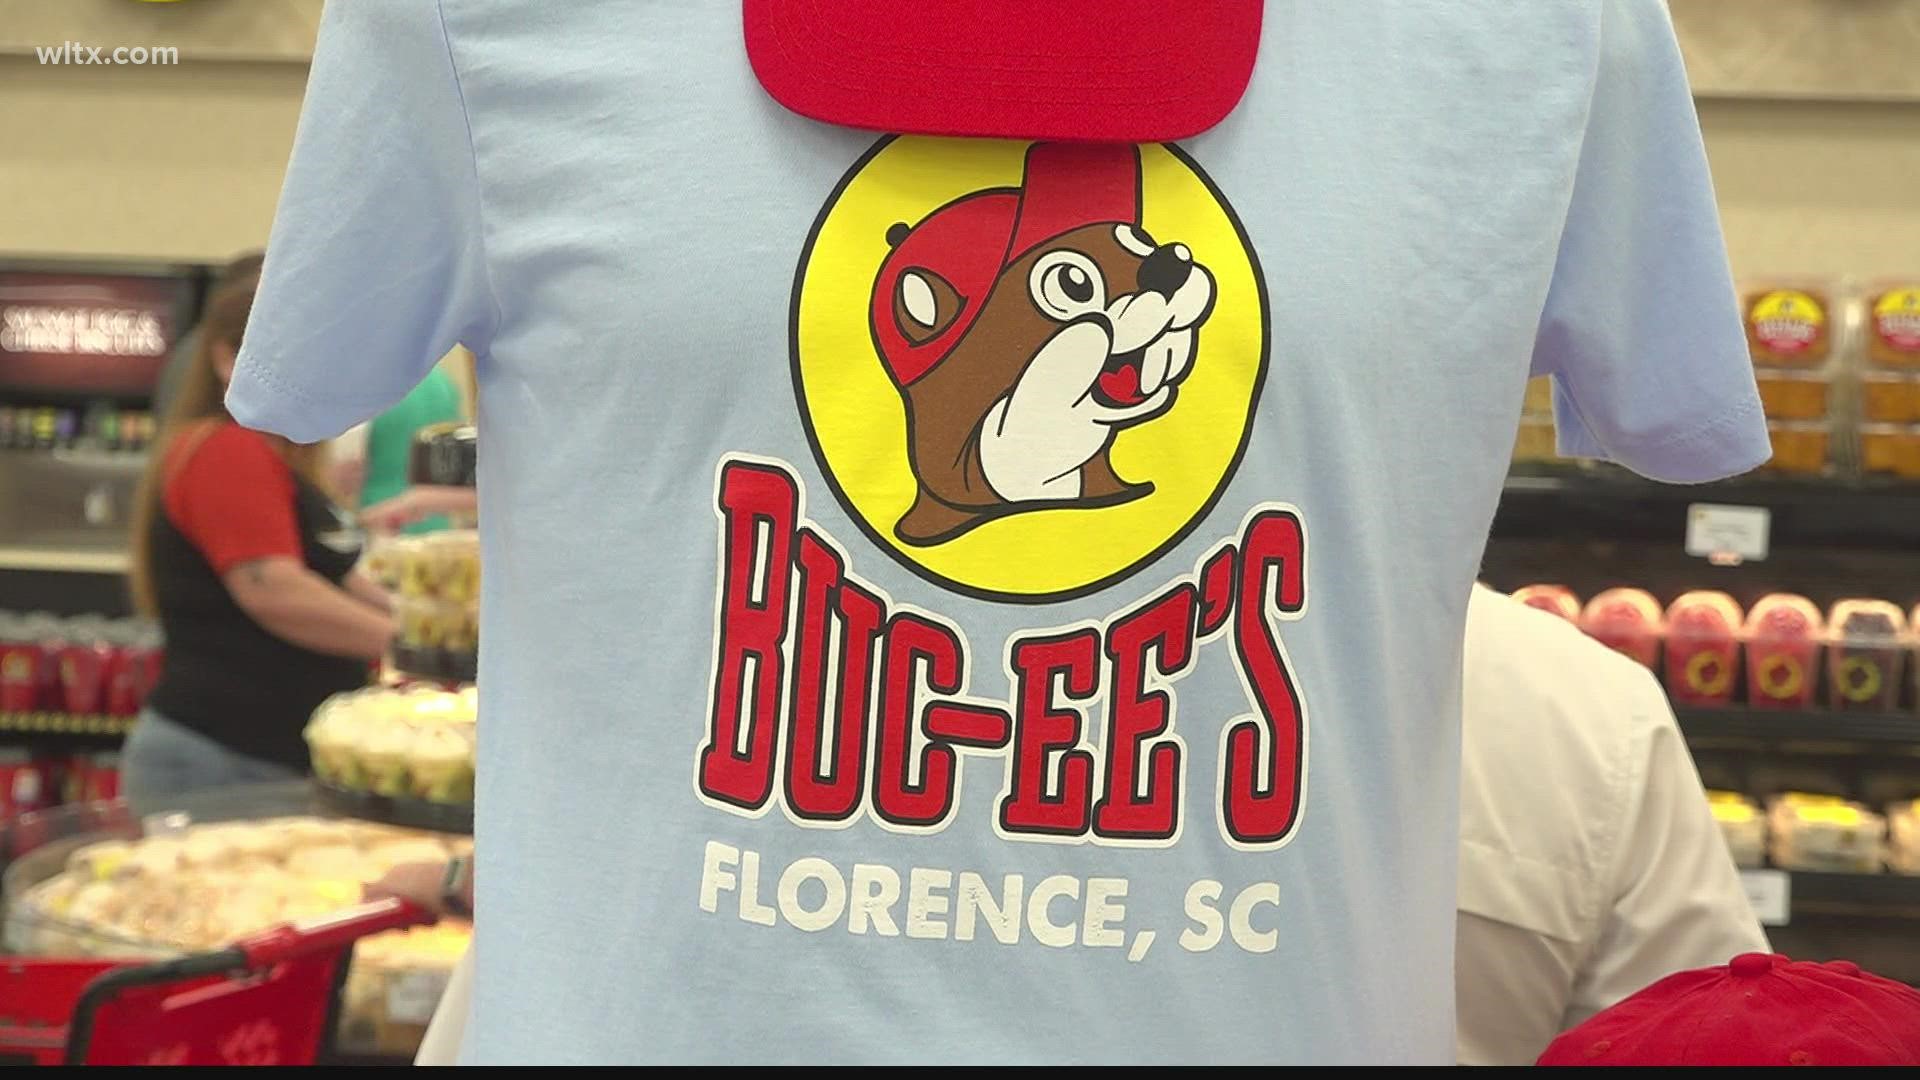 After months of anticipation, the first Buc-ee's has opened in South Carolina. It's a massive gas station, but as those who love will tell you, it's so much more.